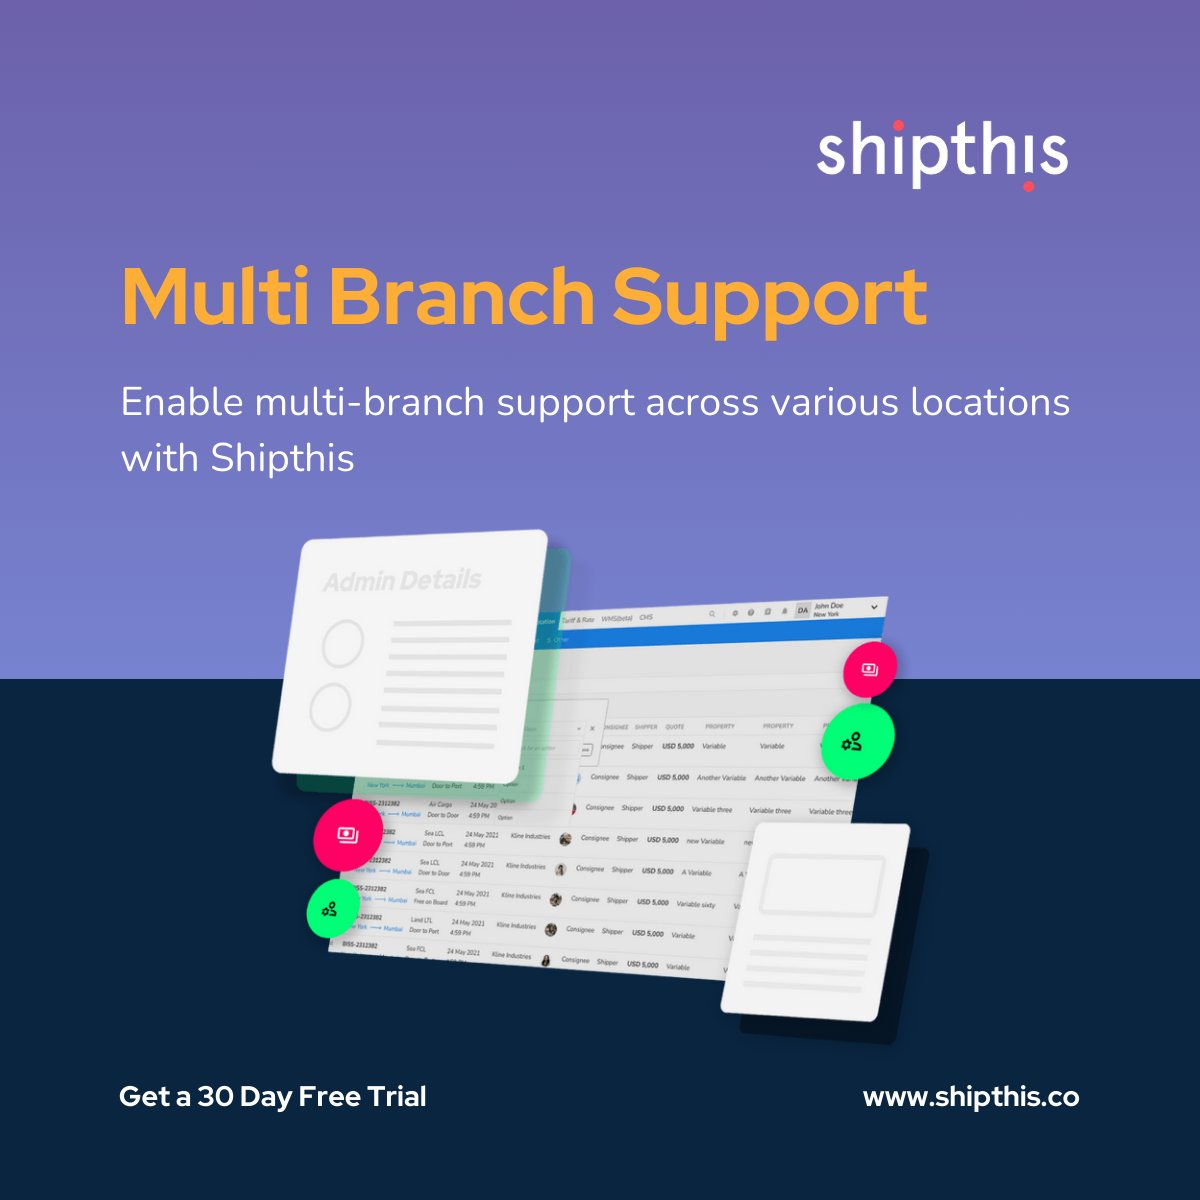 Shipthis's multi-branch support functionality enhances operations across various locations by integrating inter-branch support, allowing for automatically replicating jobs across dashboards and ensuring unified visibility. #Shipthis #FreightForwarding #MultiBranchIntegration